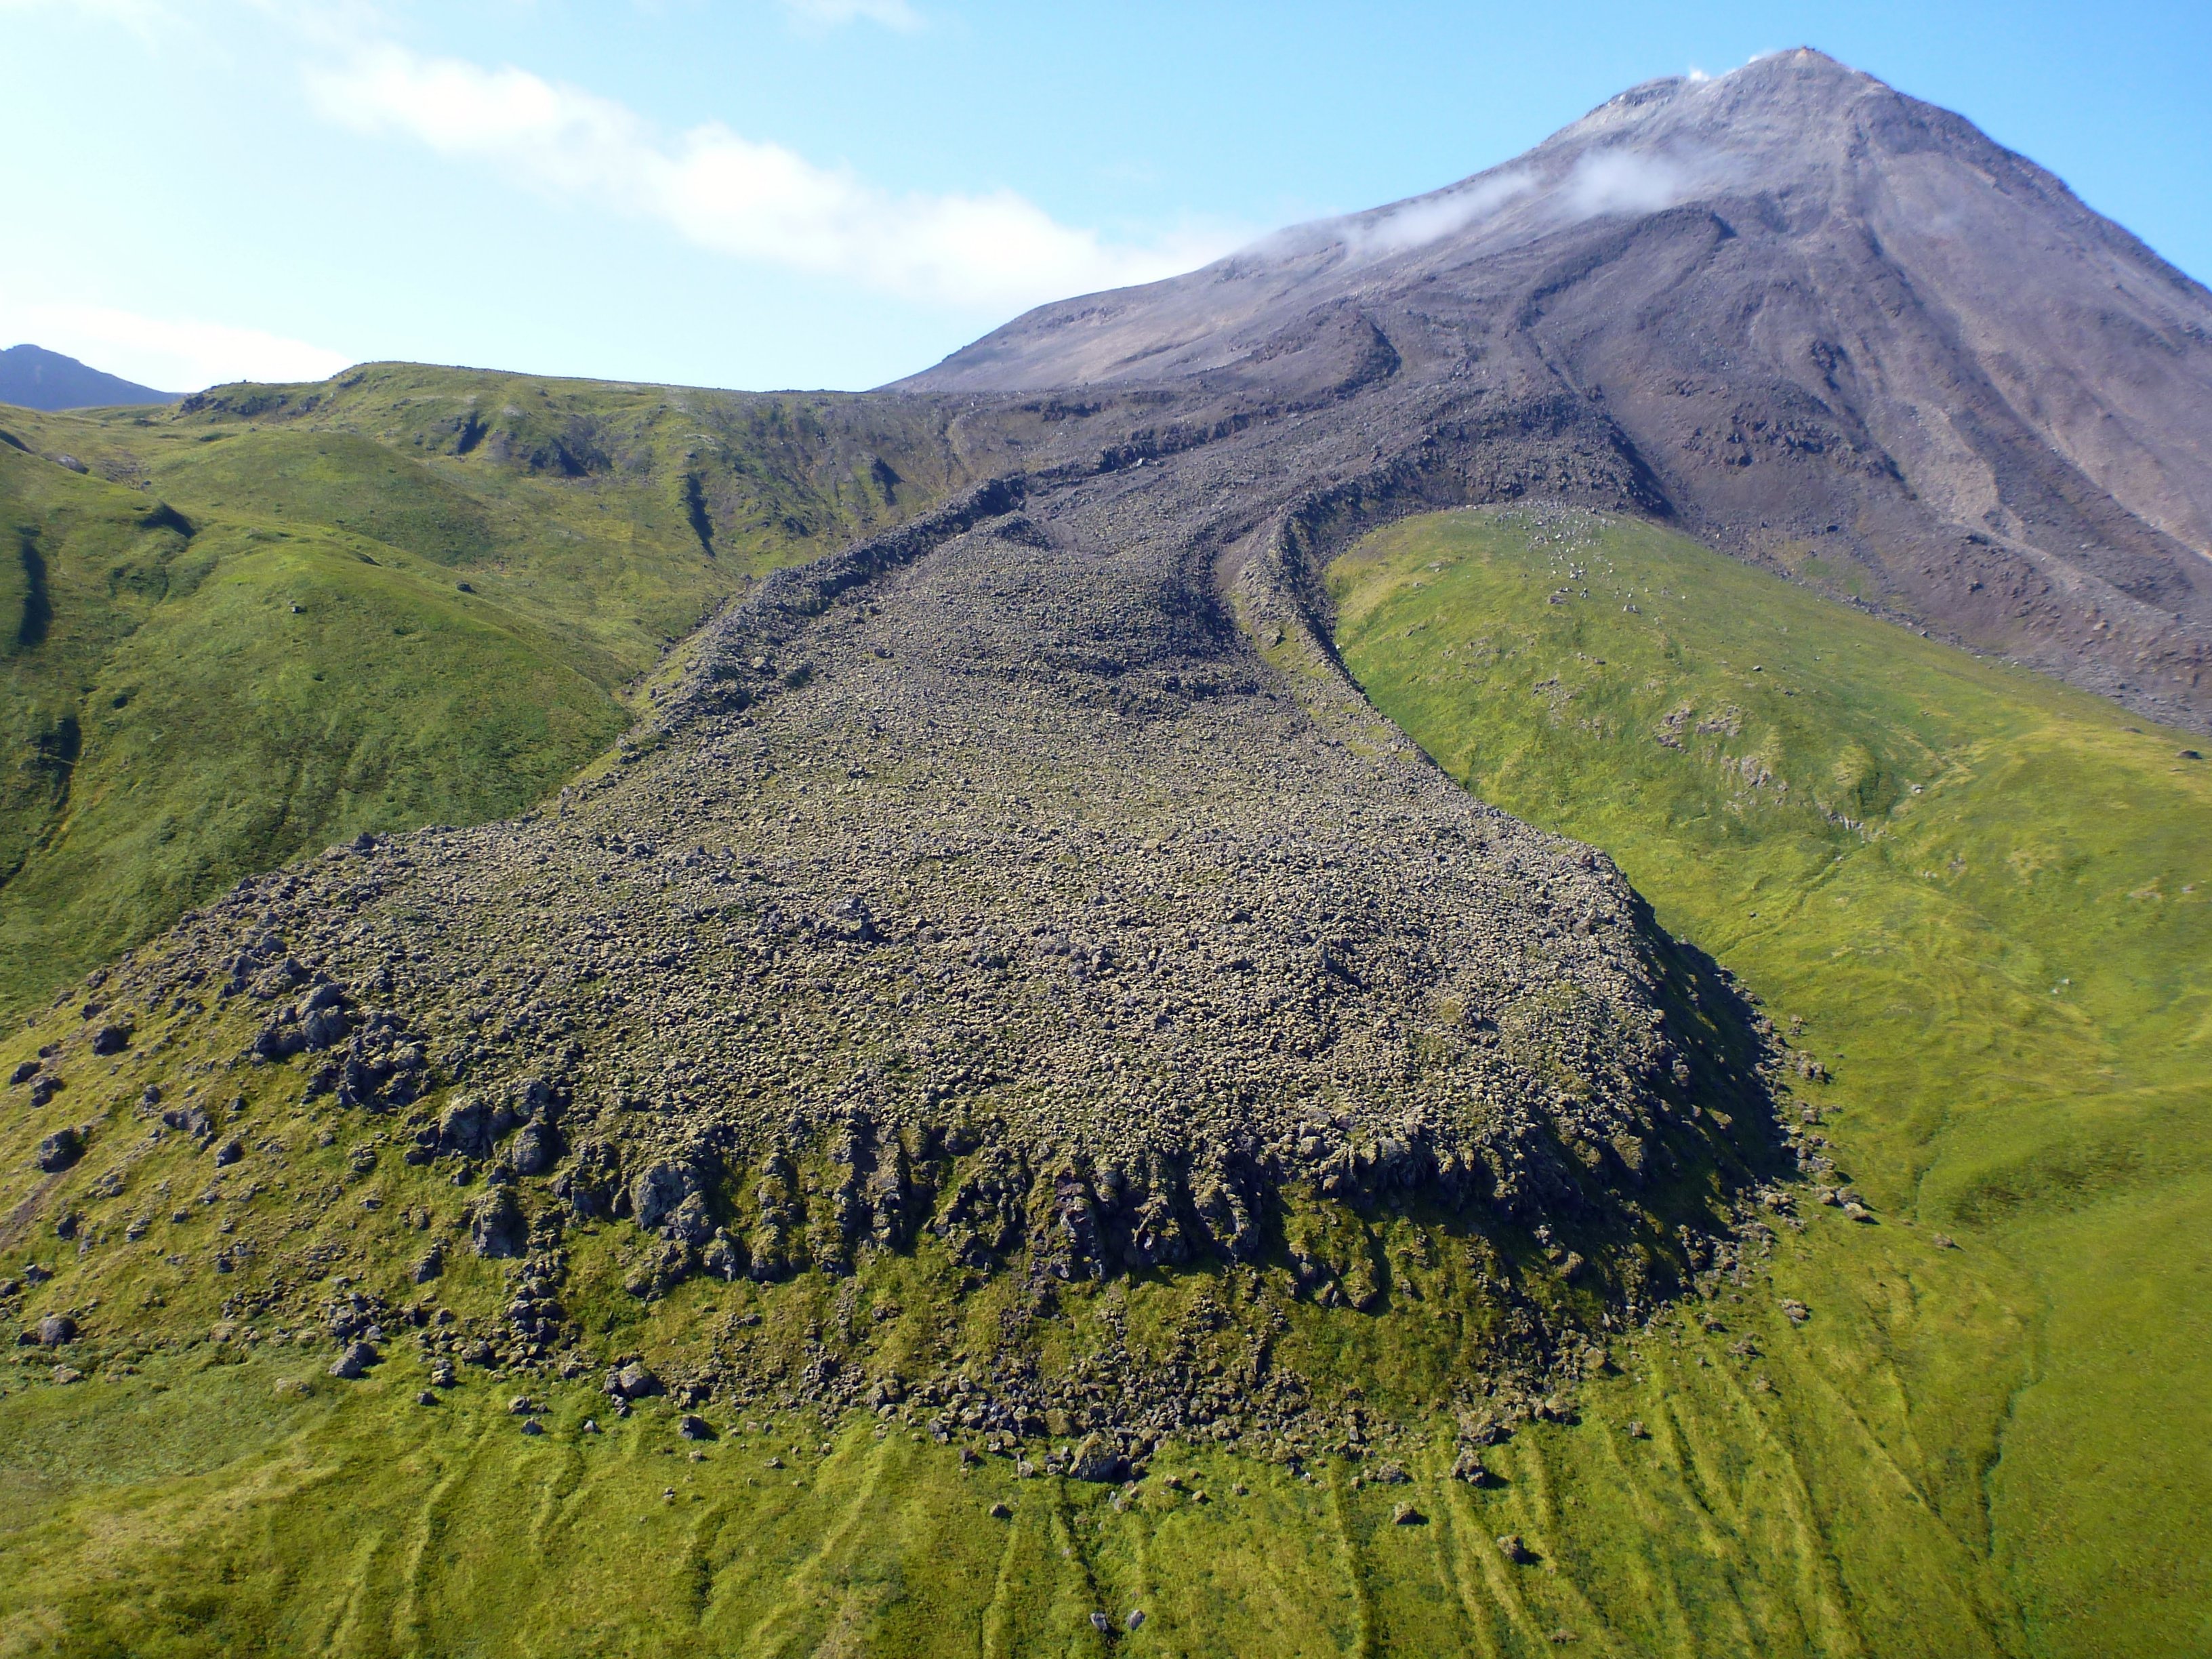 Kanaga Volcano, Aleutian Islands, as seen from the east. The blocky andesite lava flow in the foreground erupted in 1906. Photo credit: Michelle Coombs, USGS